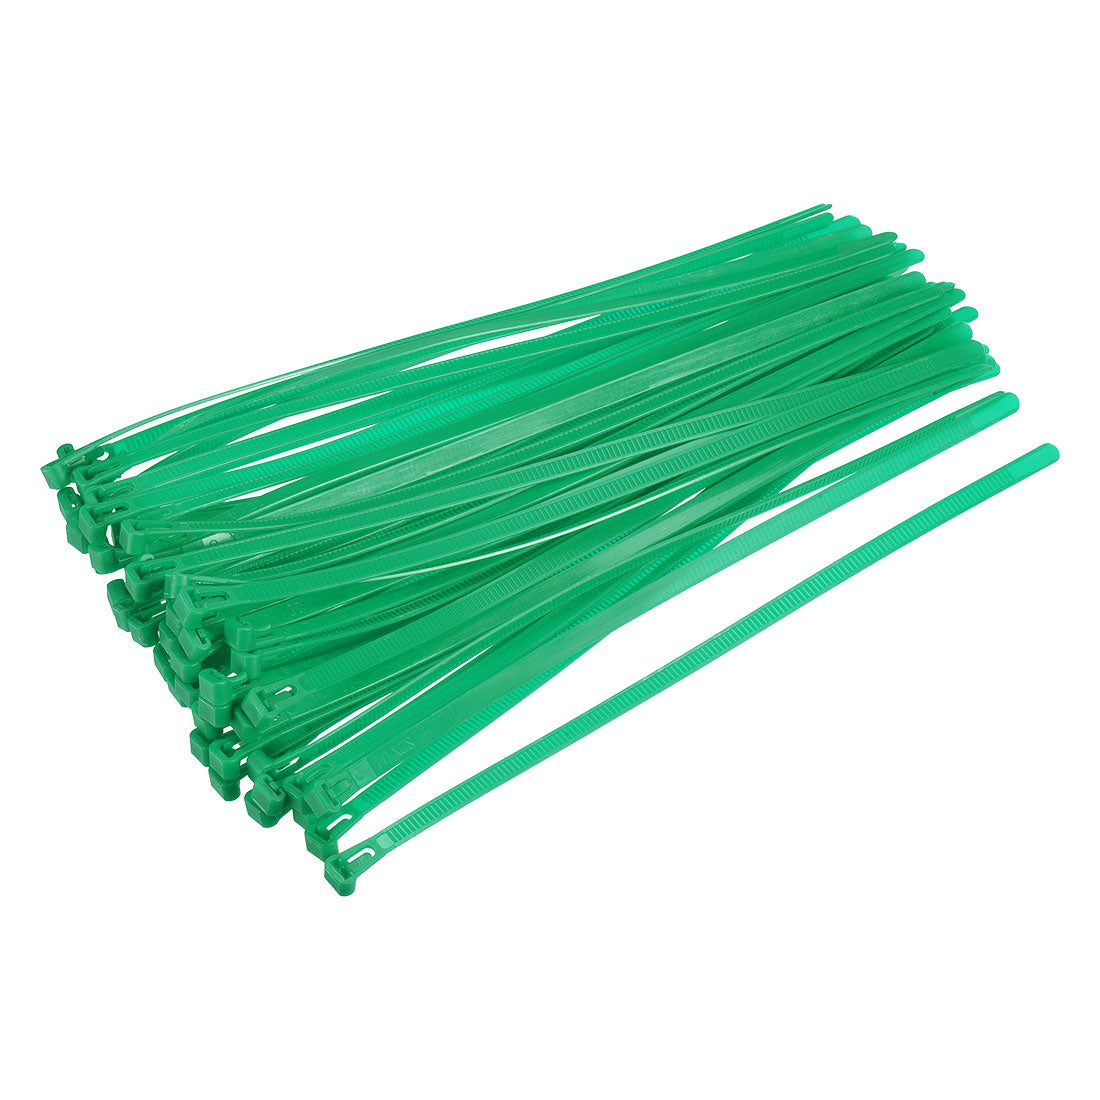 uxcell Uxcell Reusable Cable Ties 450mmx7.4mm Adjustable Nylon Zip Ties Wraps Green 40pcs